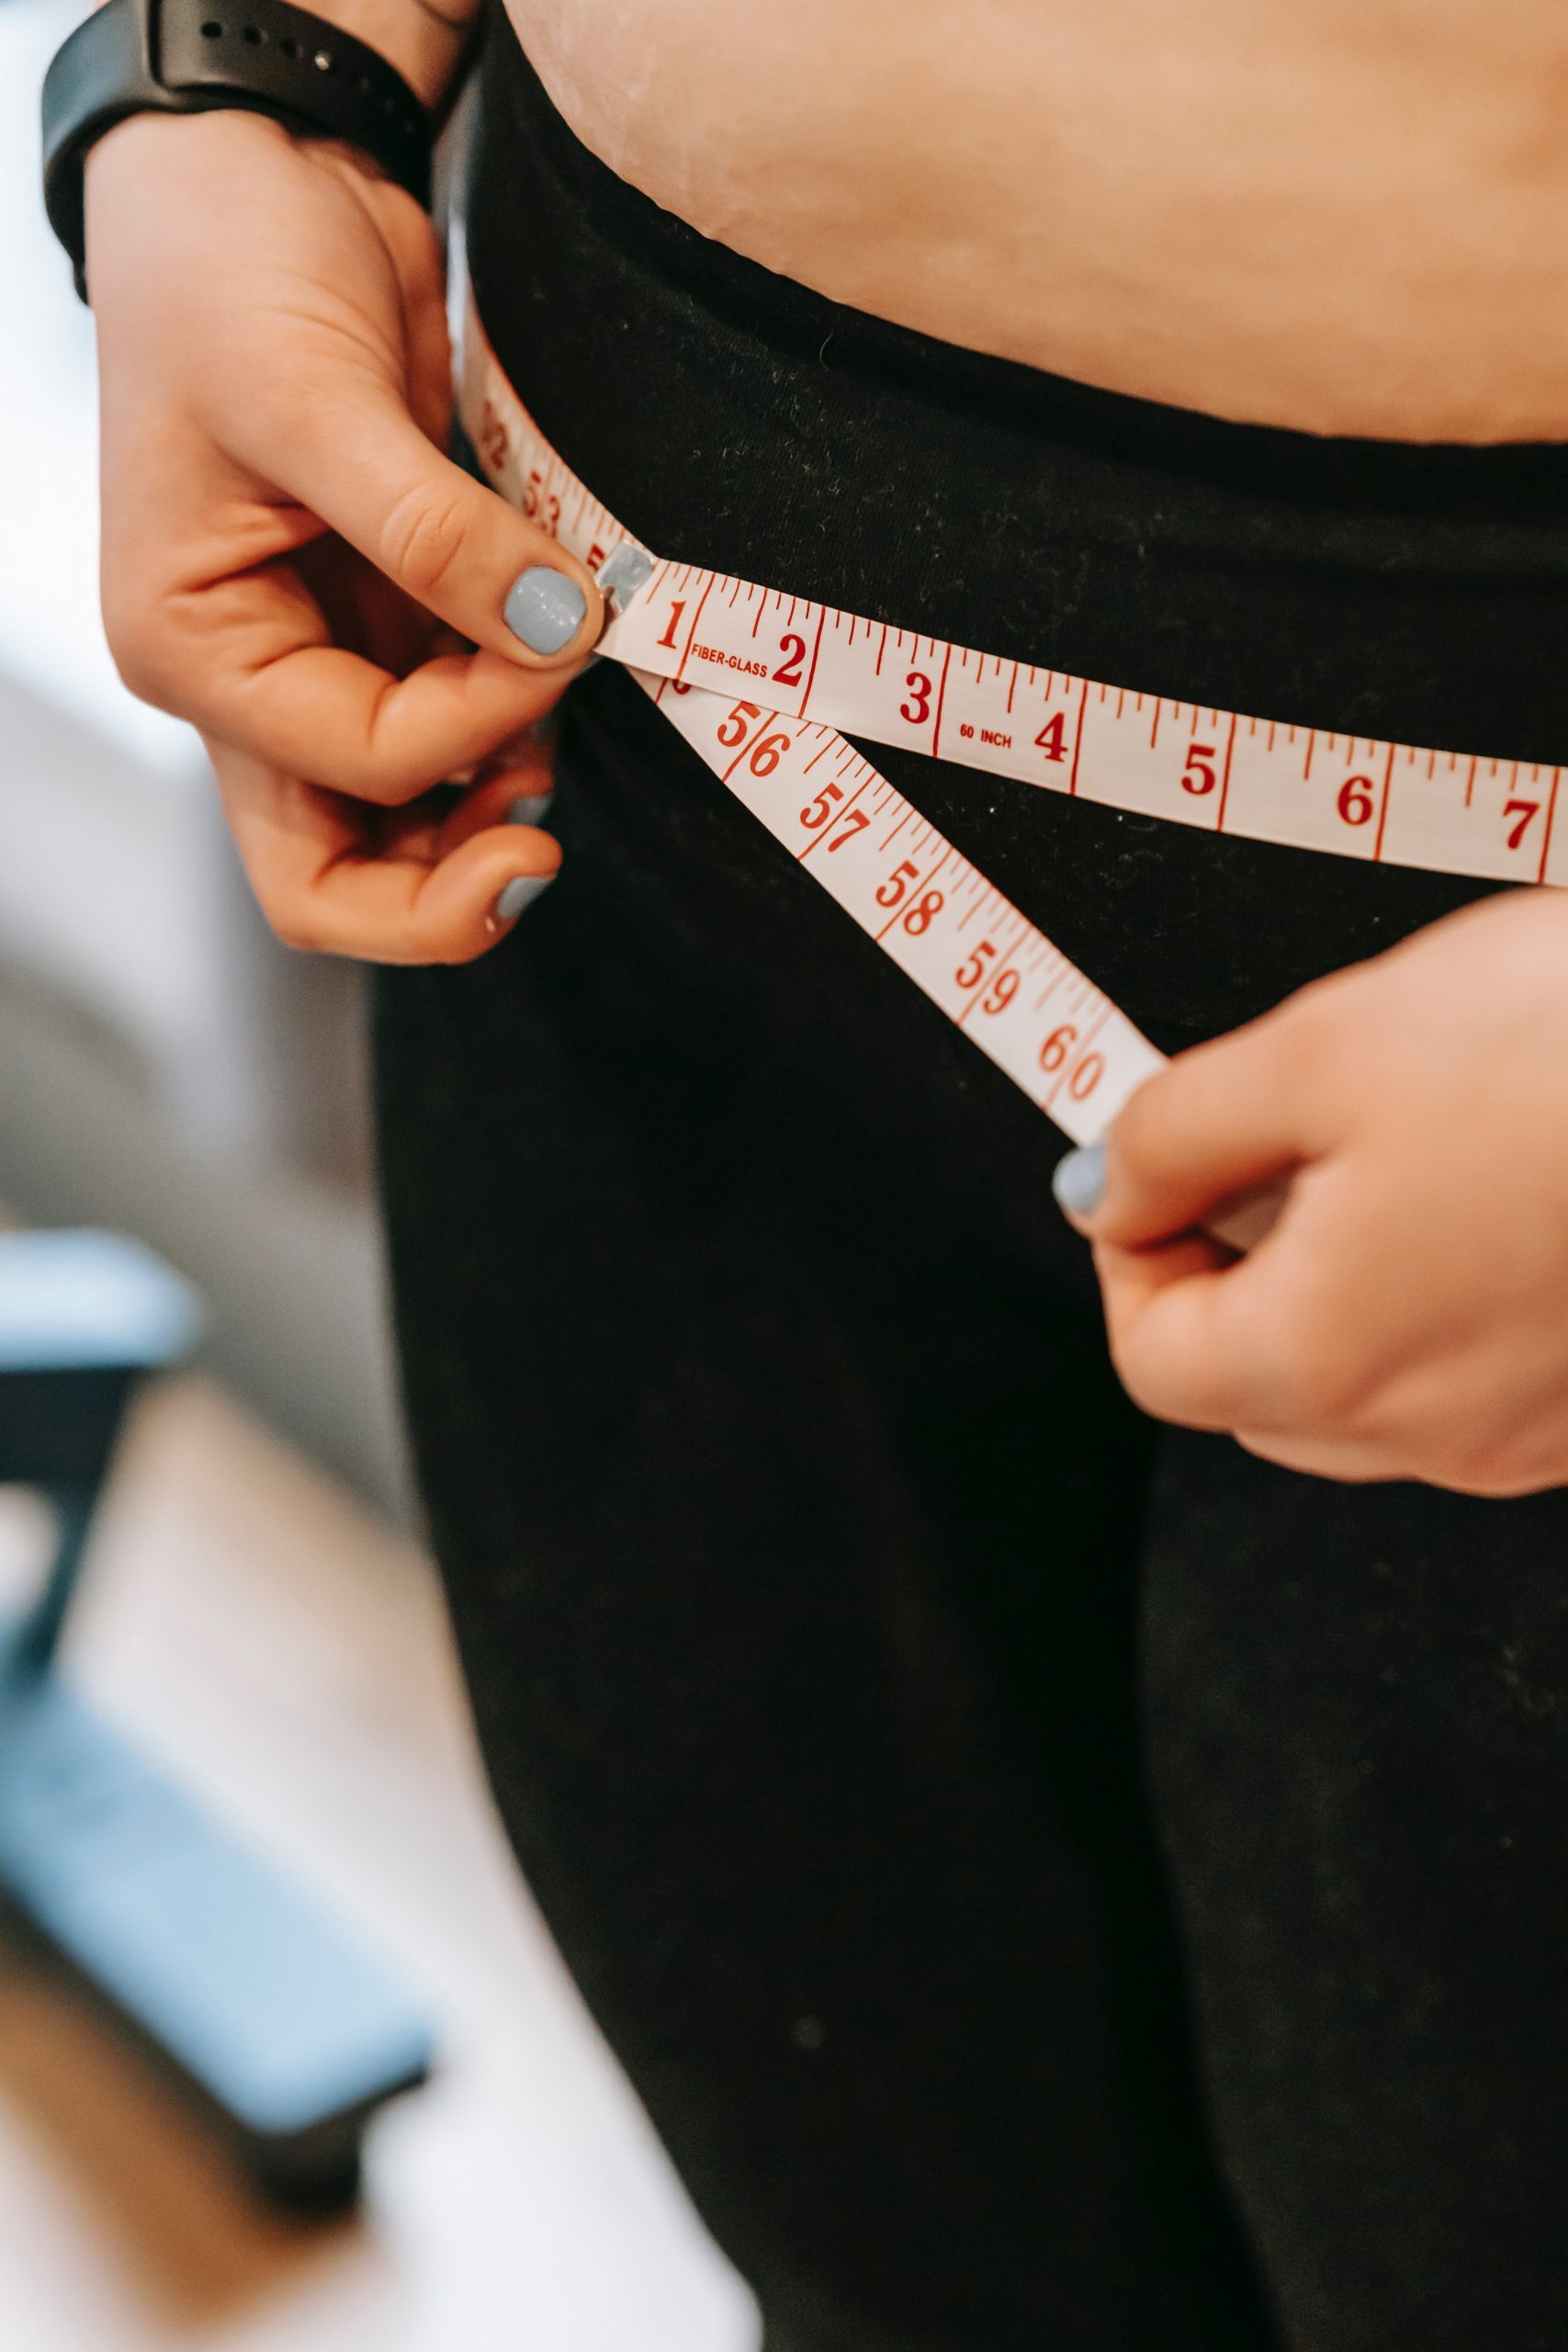 35-inch or larger waist size linked to increased health risks in older women